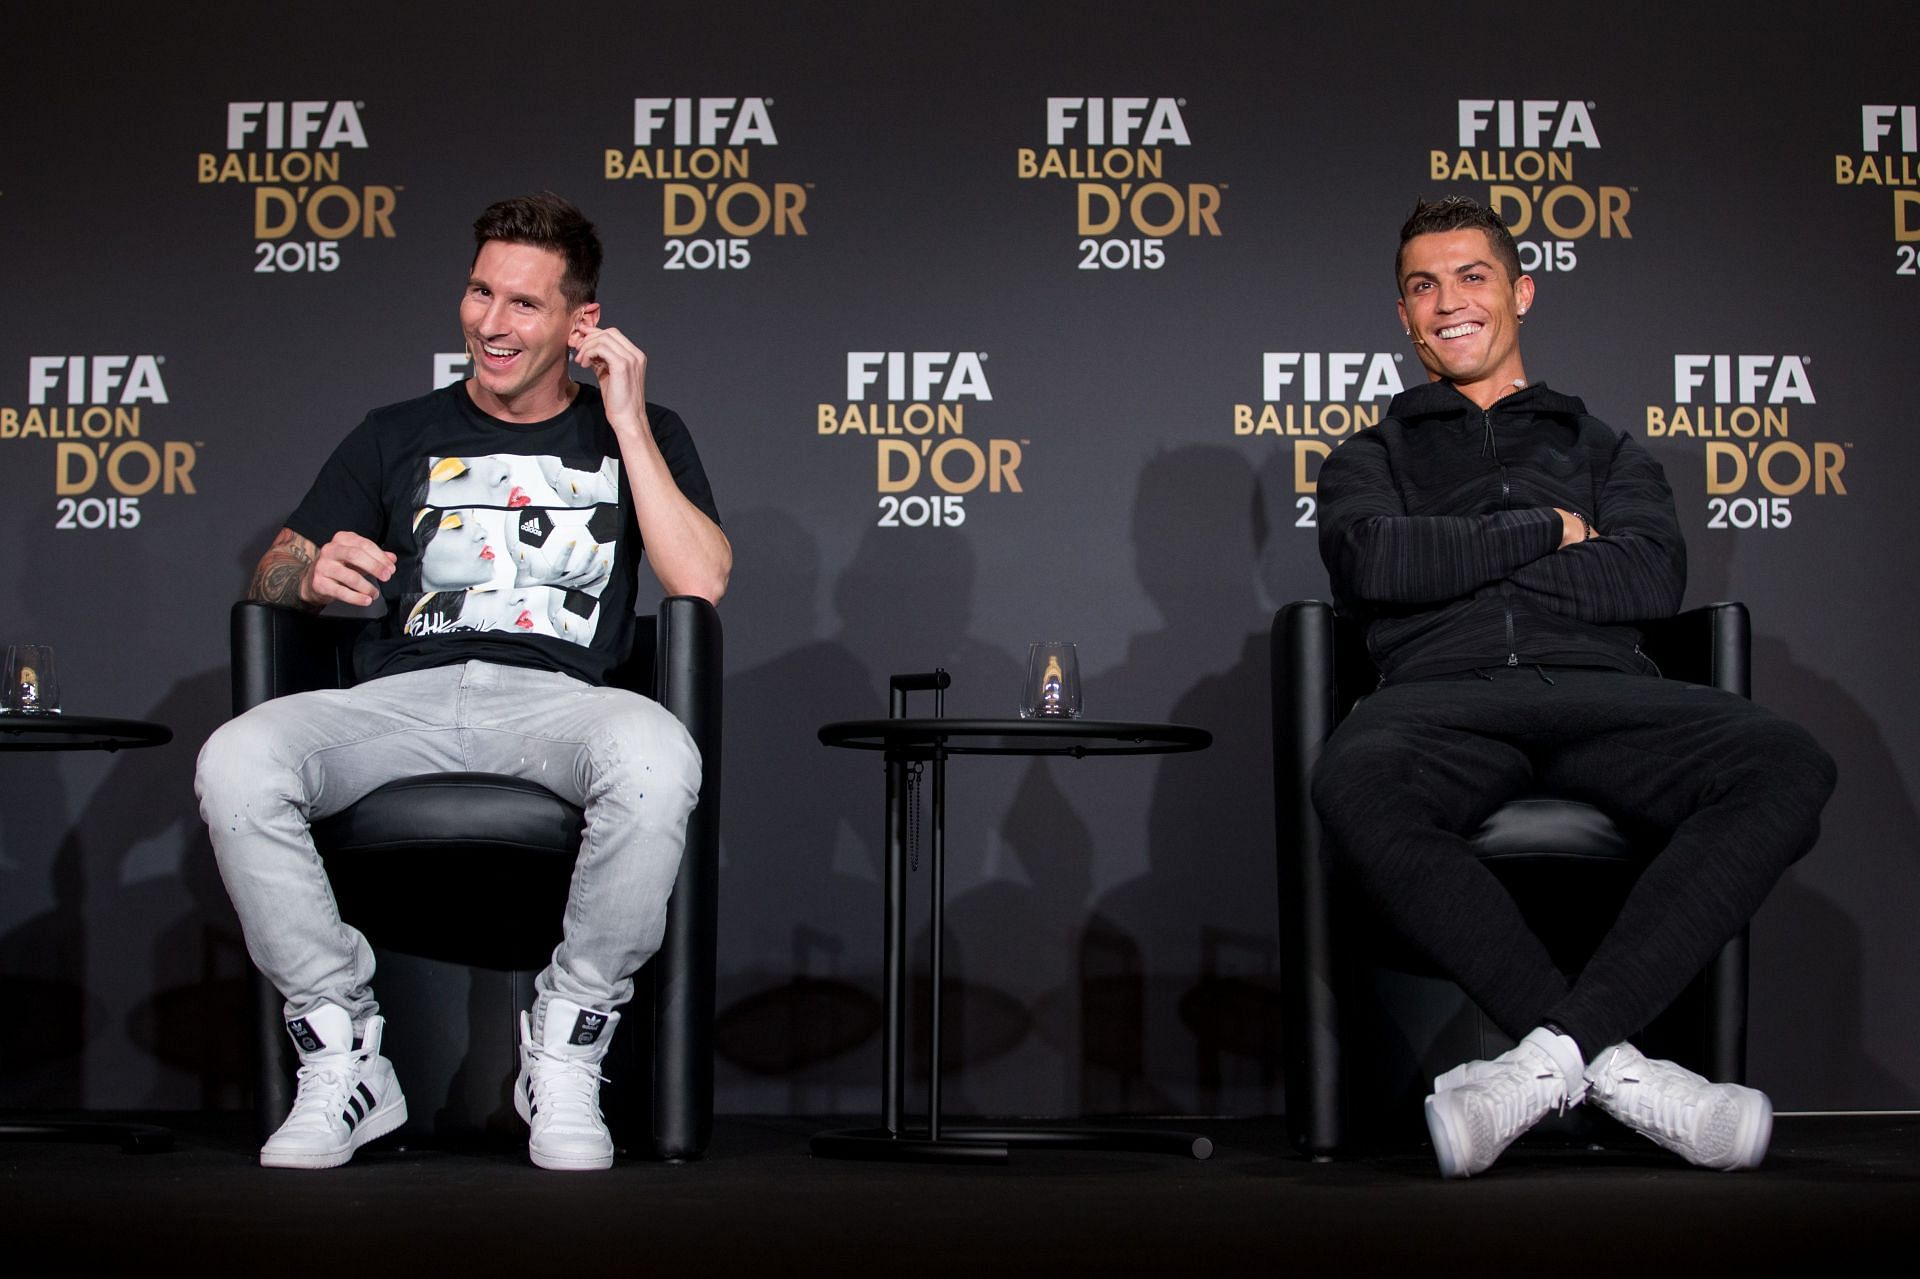 A campaign that I had been looking for a long time” – Cristiano Ronaldo  says Louis Vuitton ad with Lionel Messi fills him with 'pride' ahead of  2022 FIFA World Cup